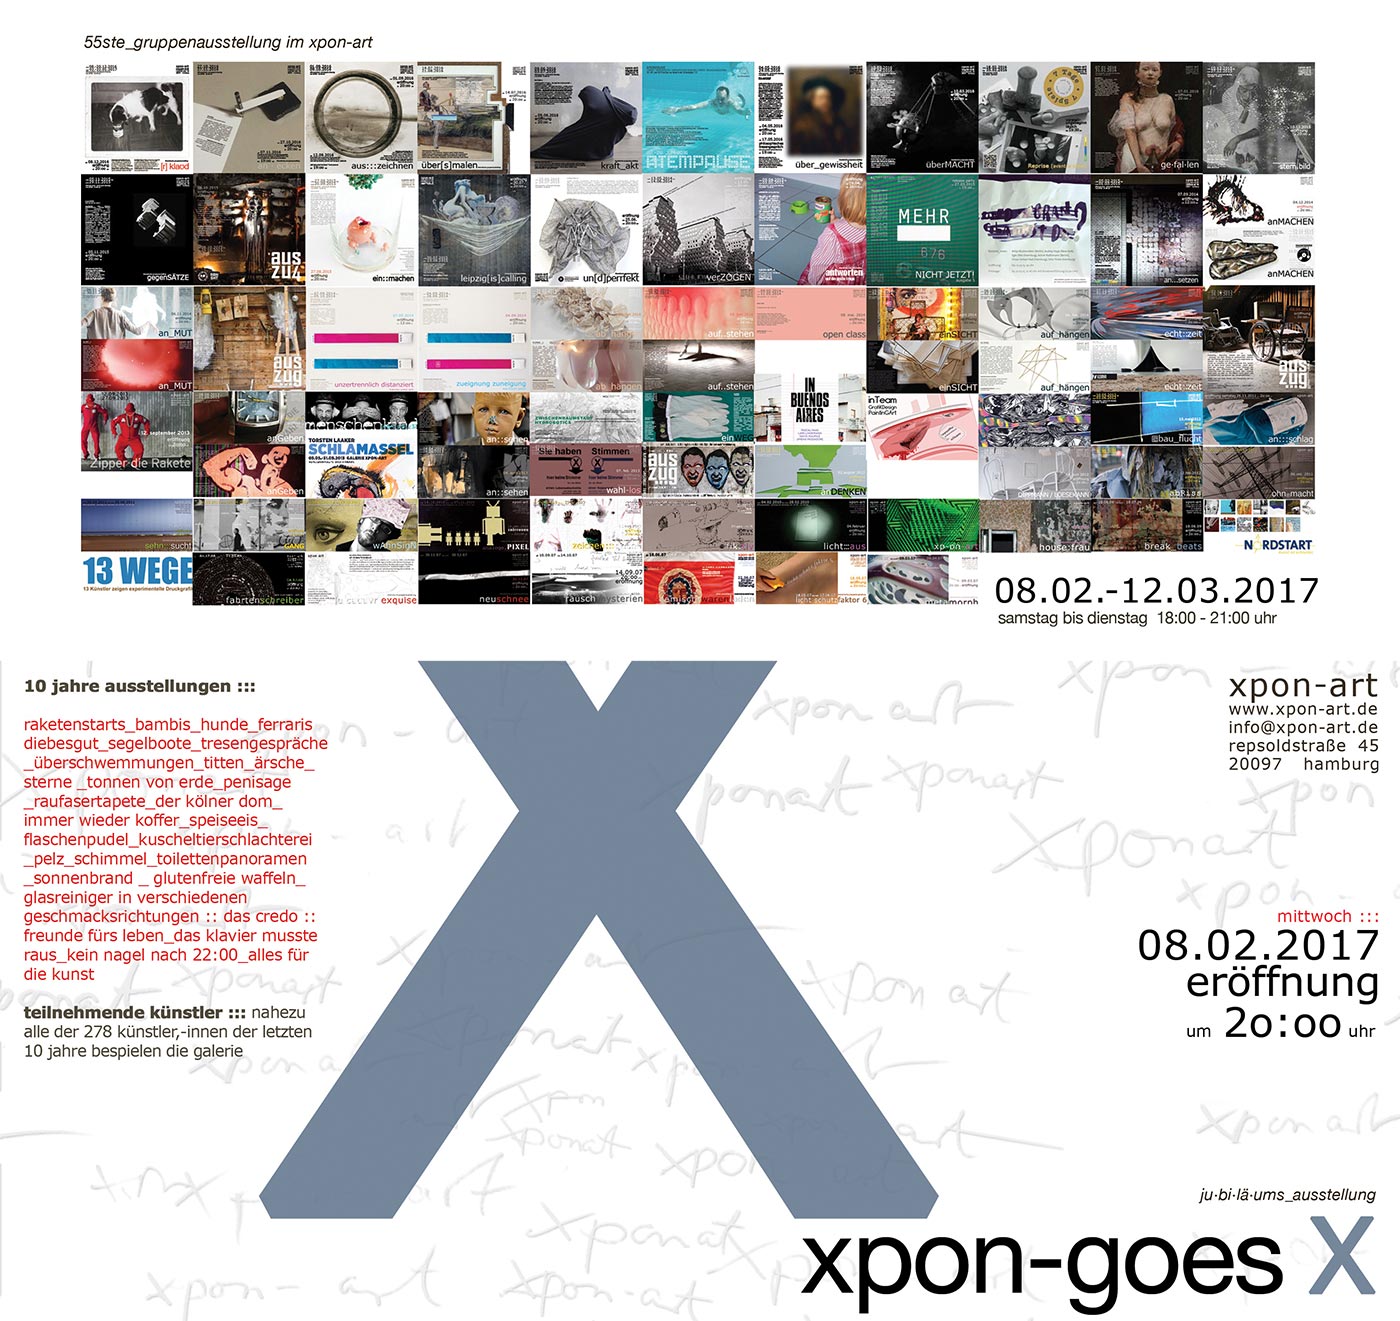 Vernissage „xpon goes x“ am 08.02.2017